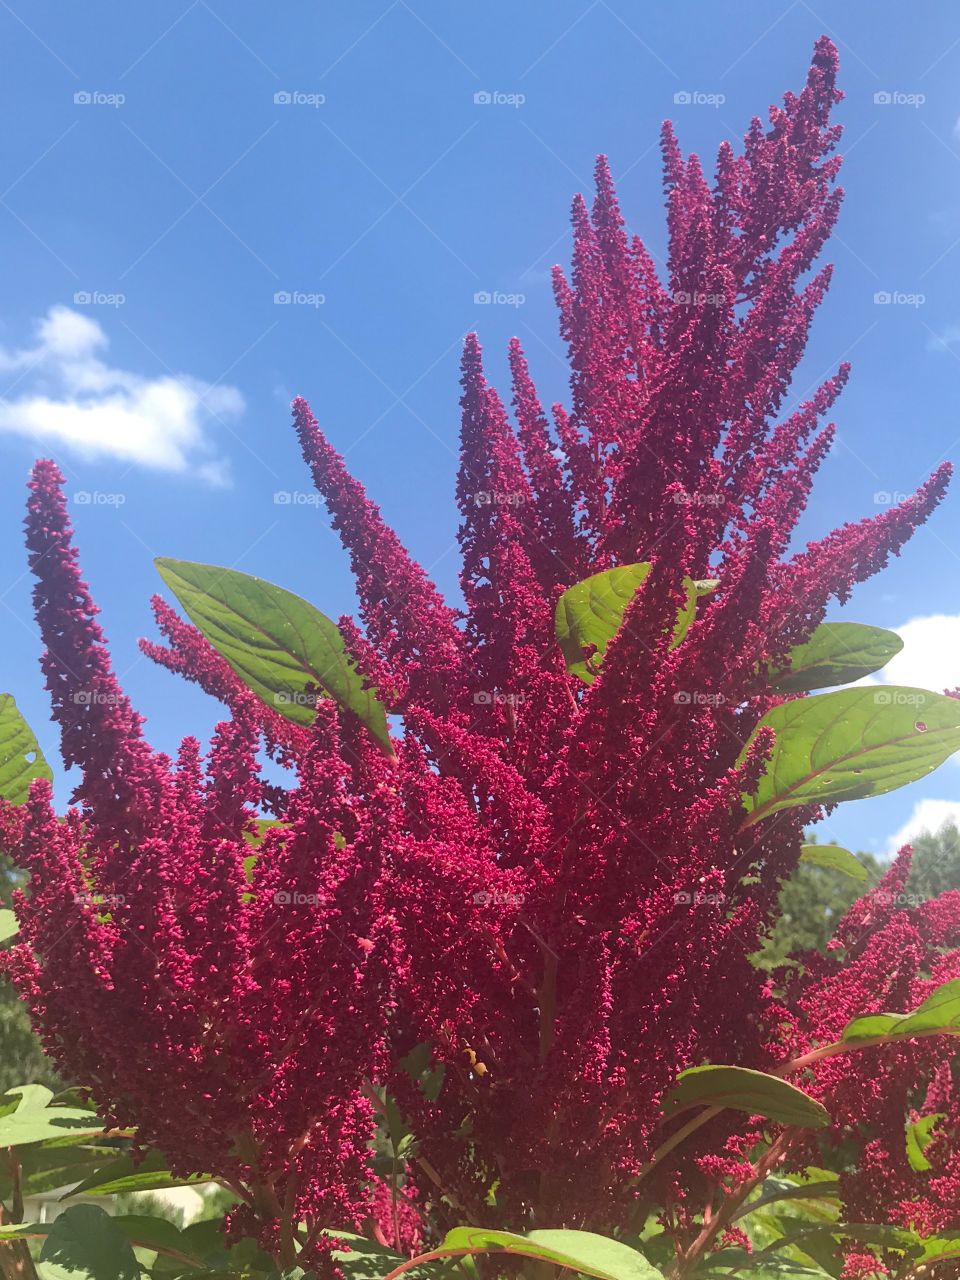 Amaranth with blue sky and leaves